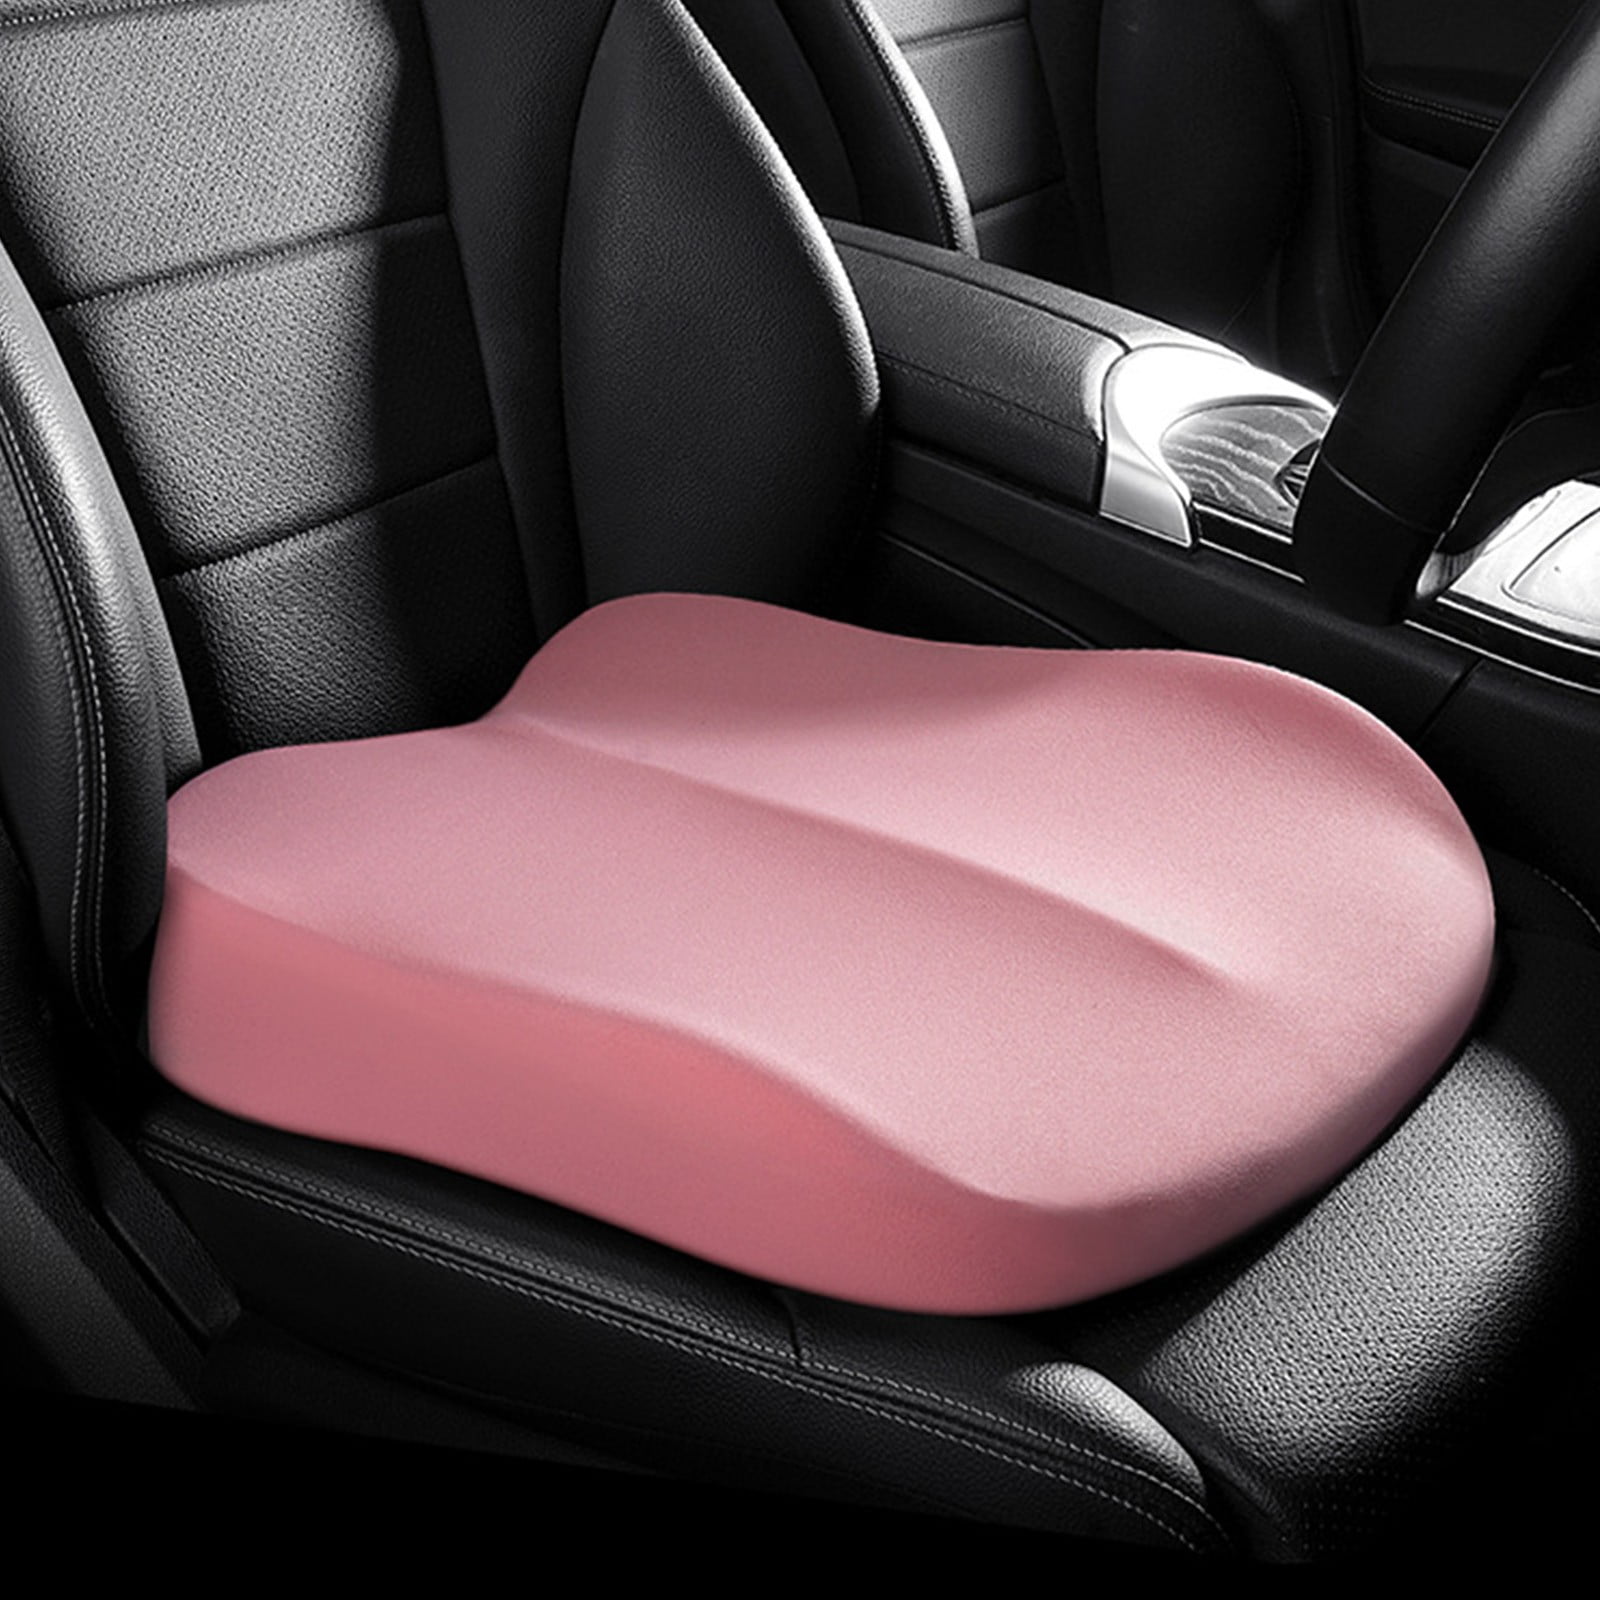 XEOVHVLJ Clearance Car Wedge Seat Cushion For Car Seat Driver/Passenger-  Wedge Car Seat Cushions For Driving Improve Vision/Posture - Memory Foam  Car